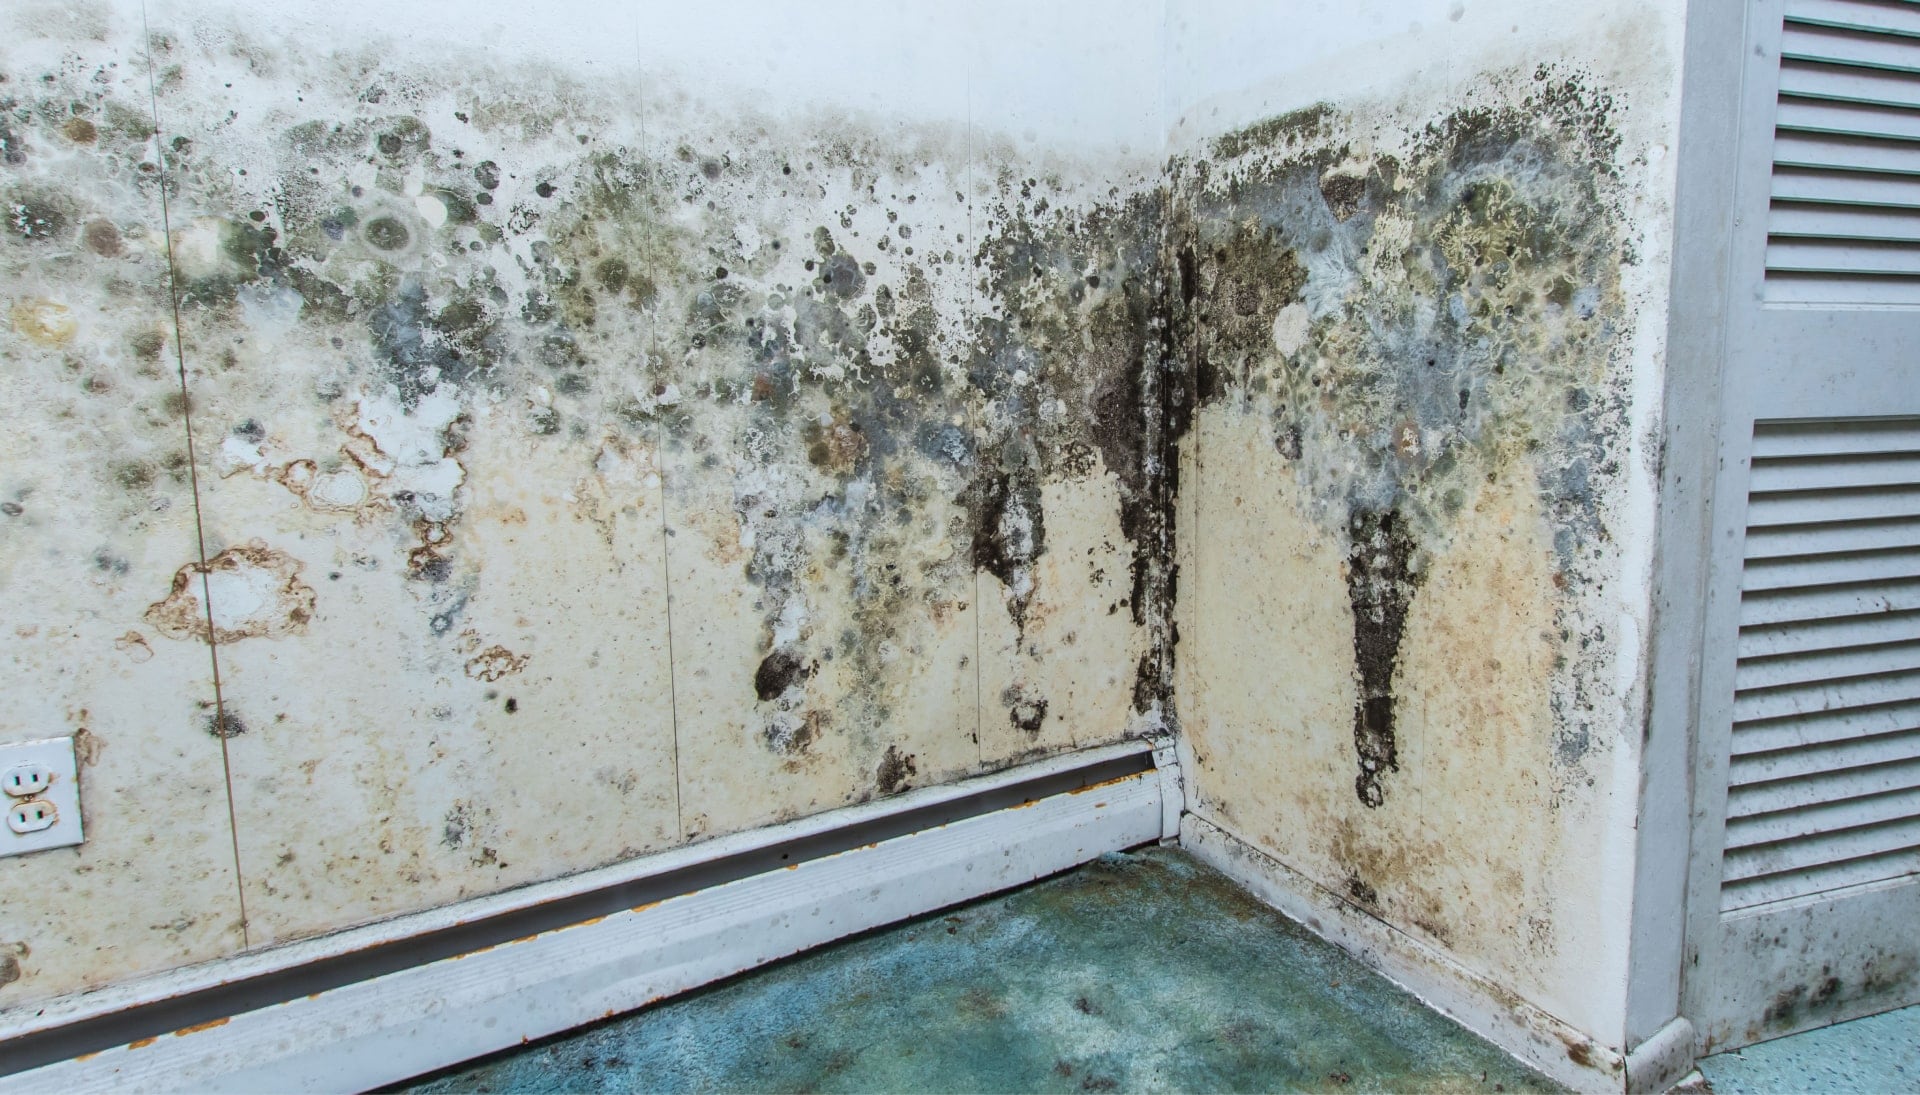 Professional mold removal, odor control, and water damage restoration service in Bellevue, Washington.